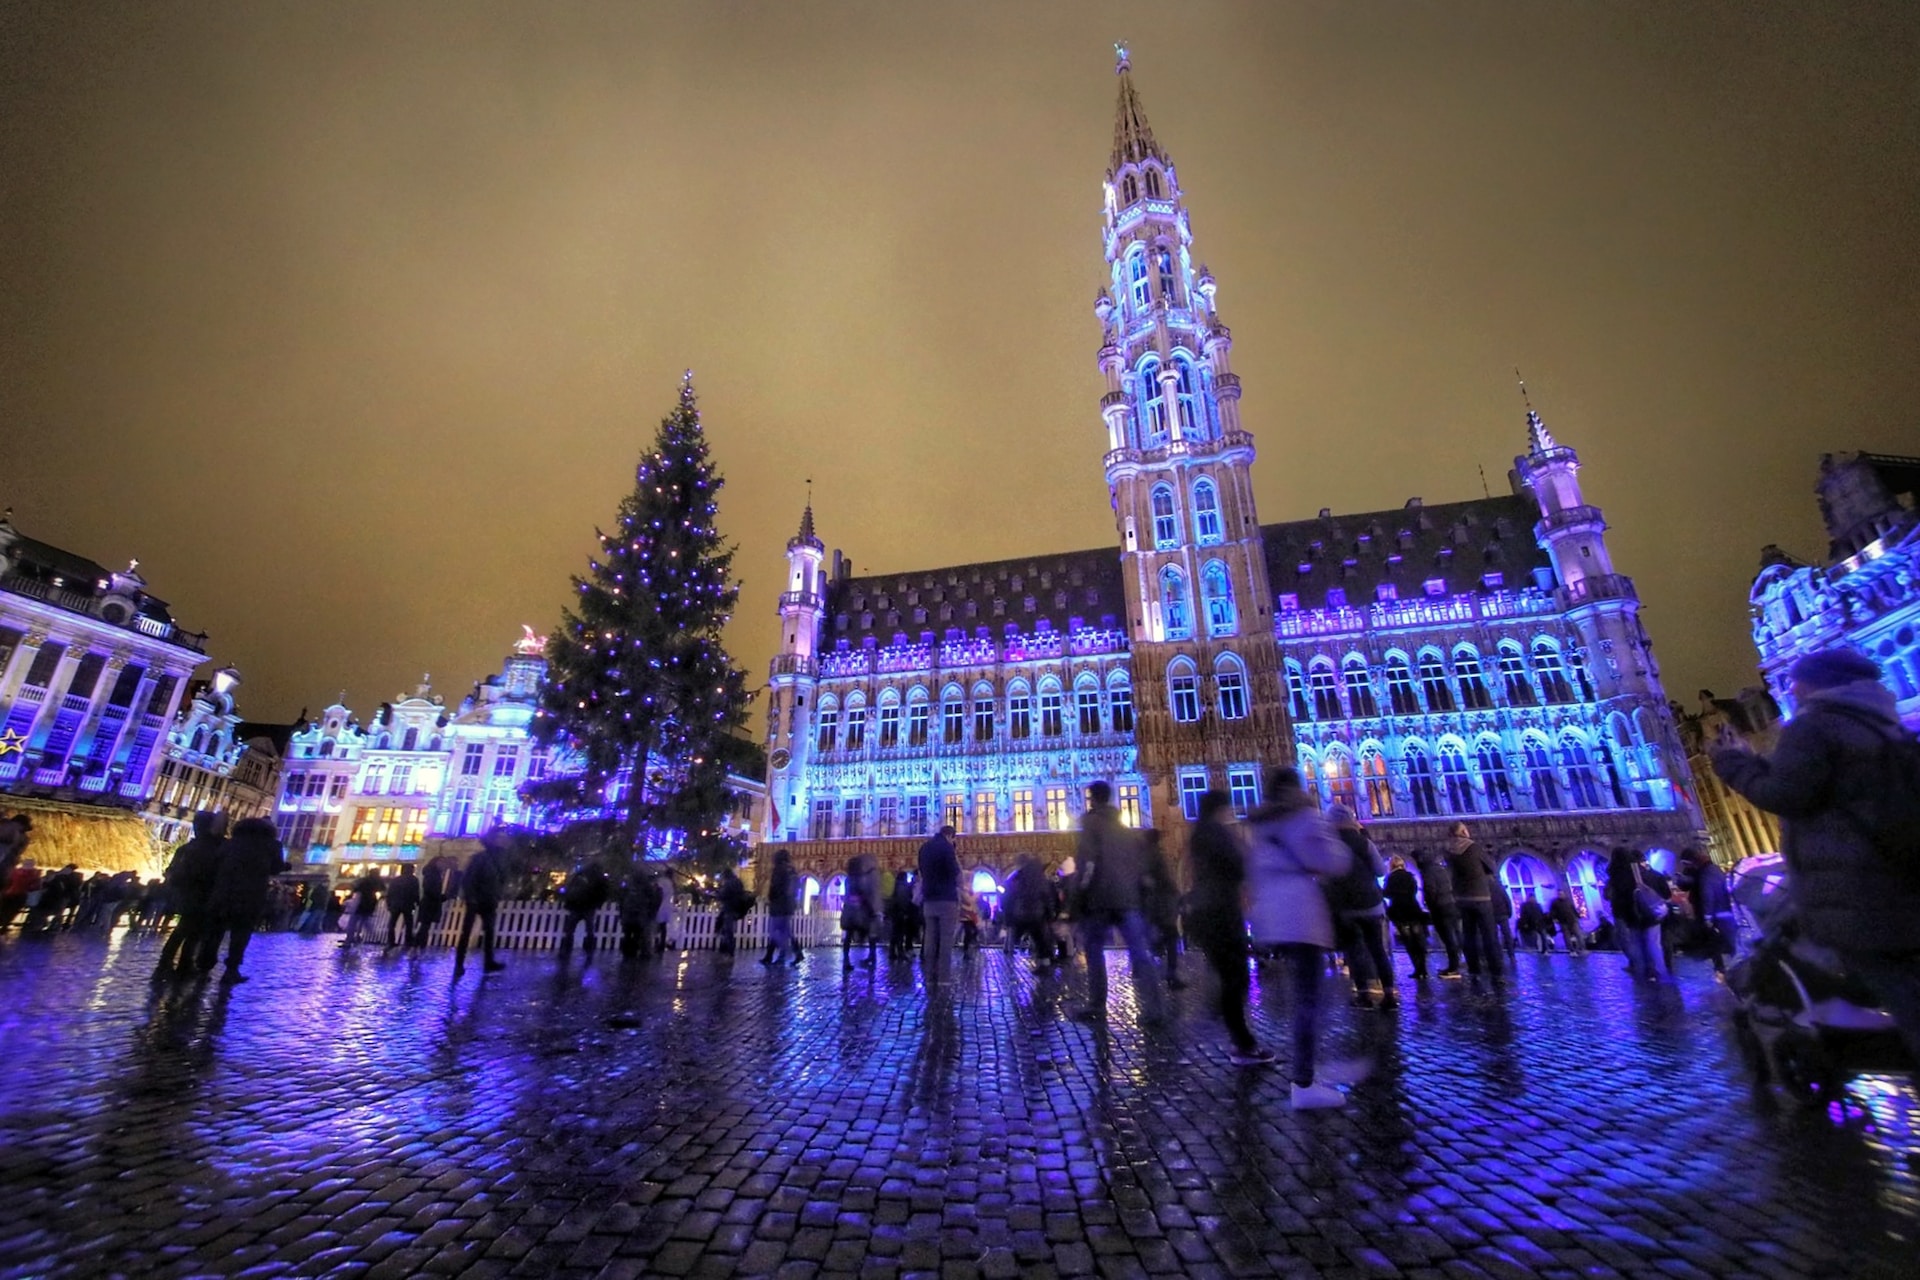 A square in a city in Belgium during Christmas.